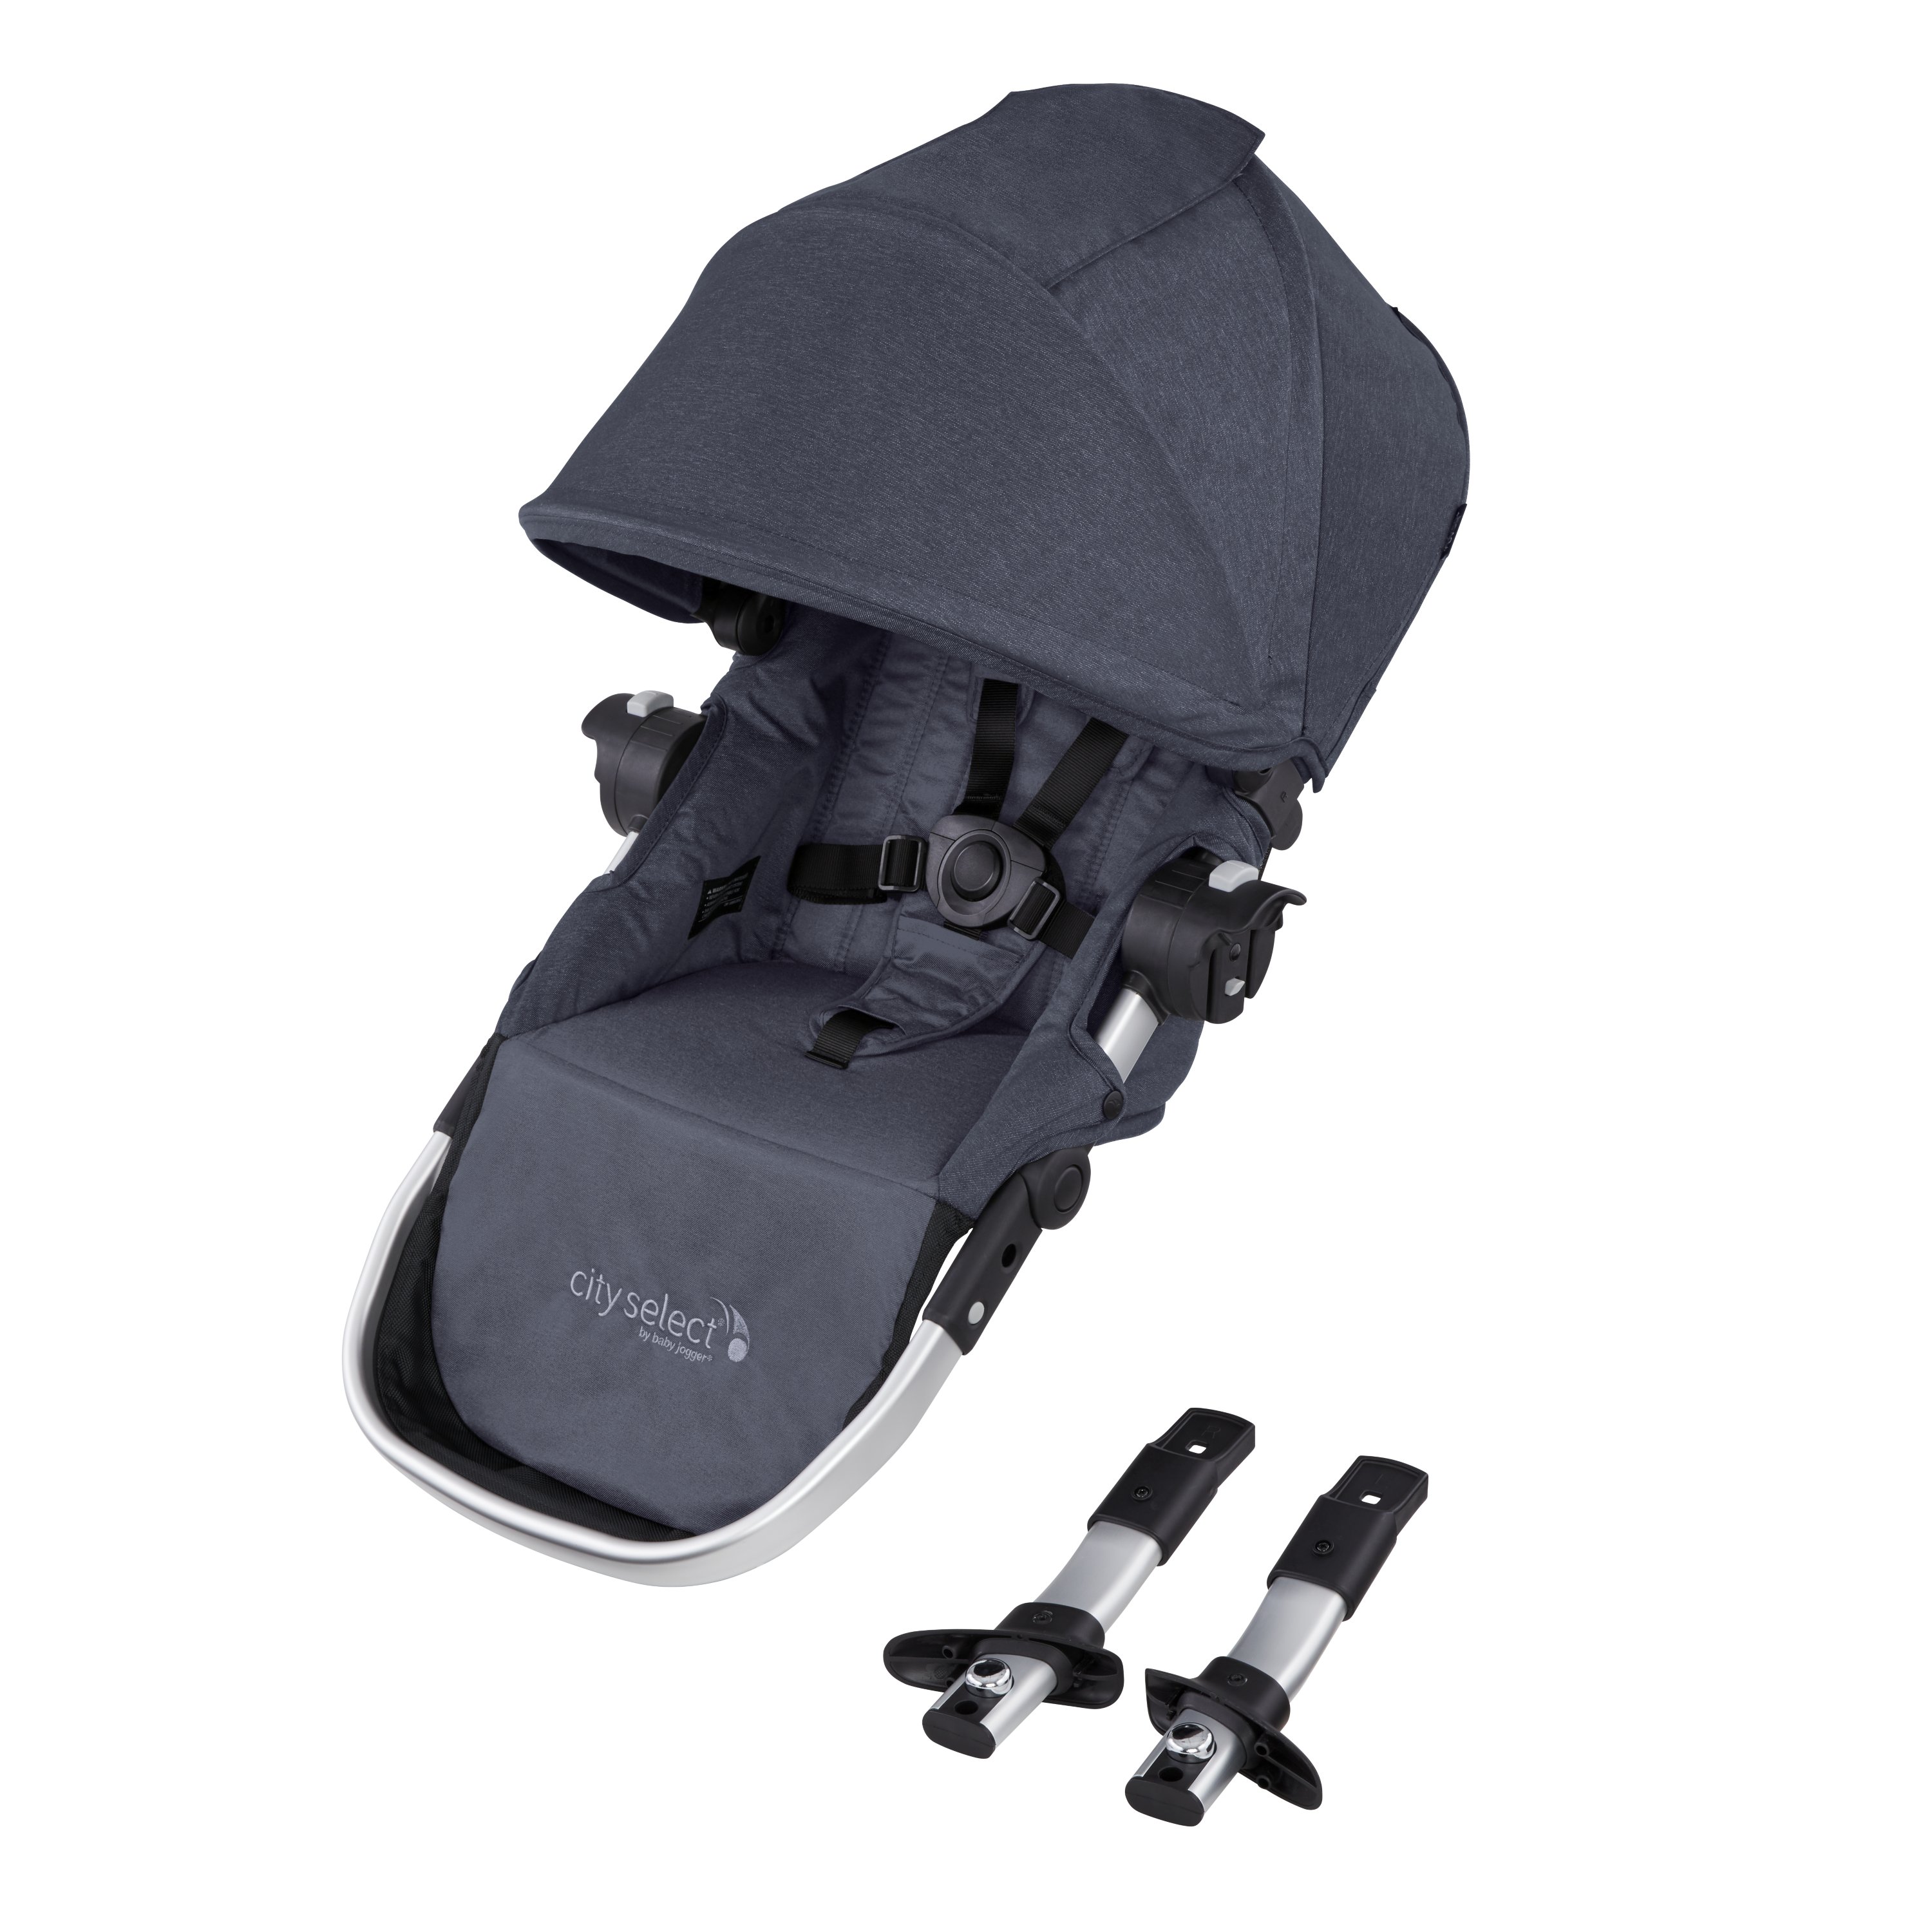 city select second seat adapter